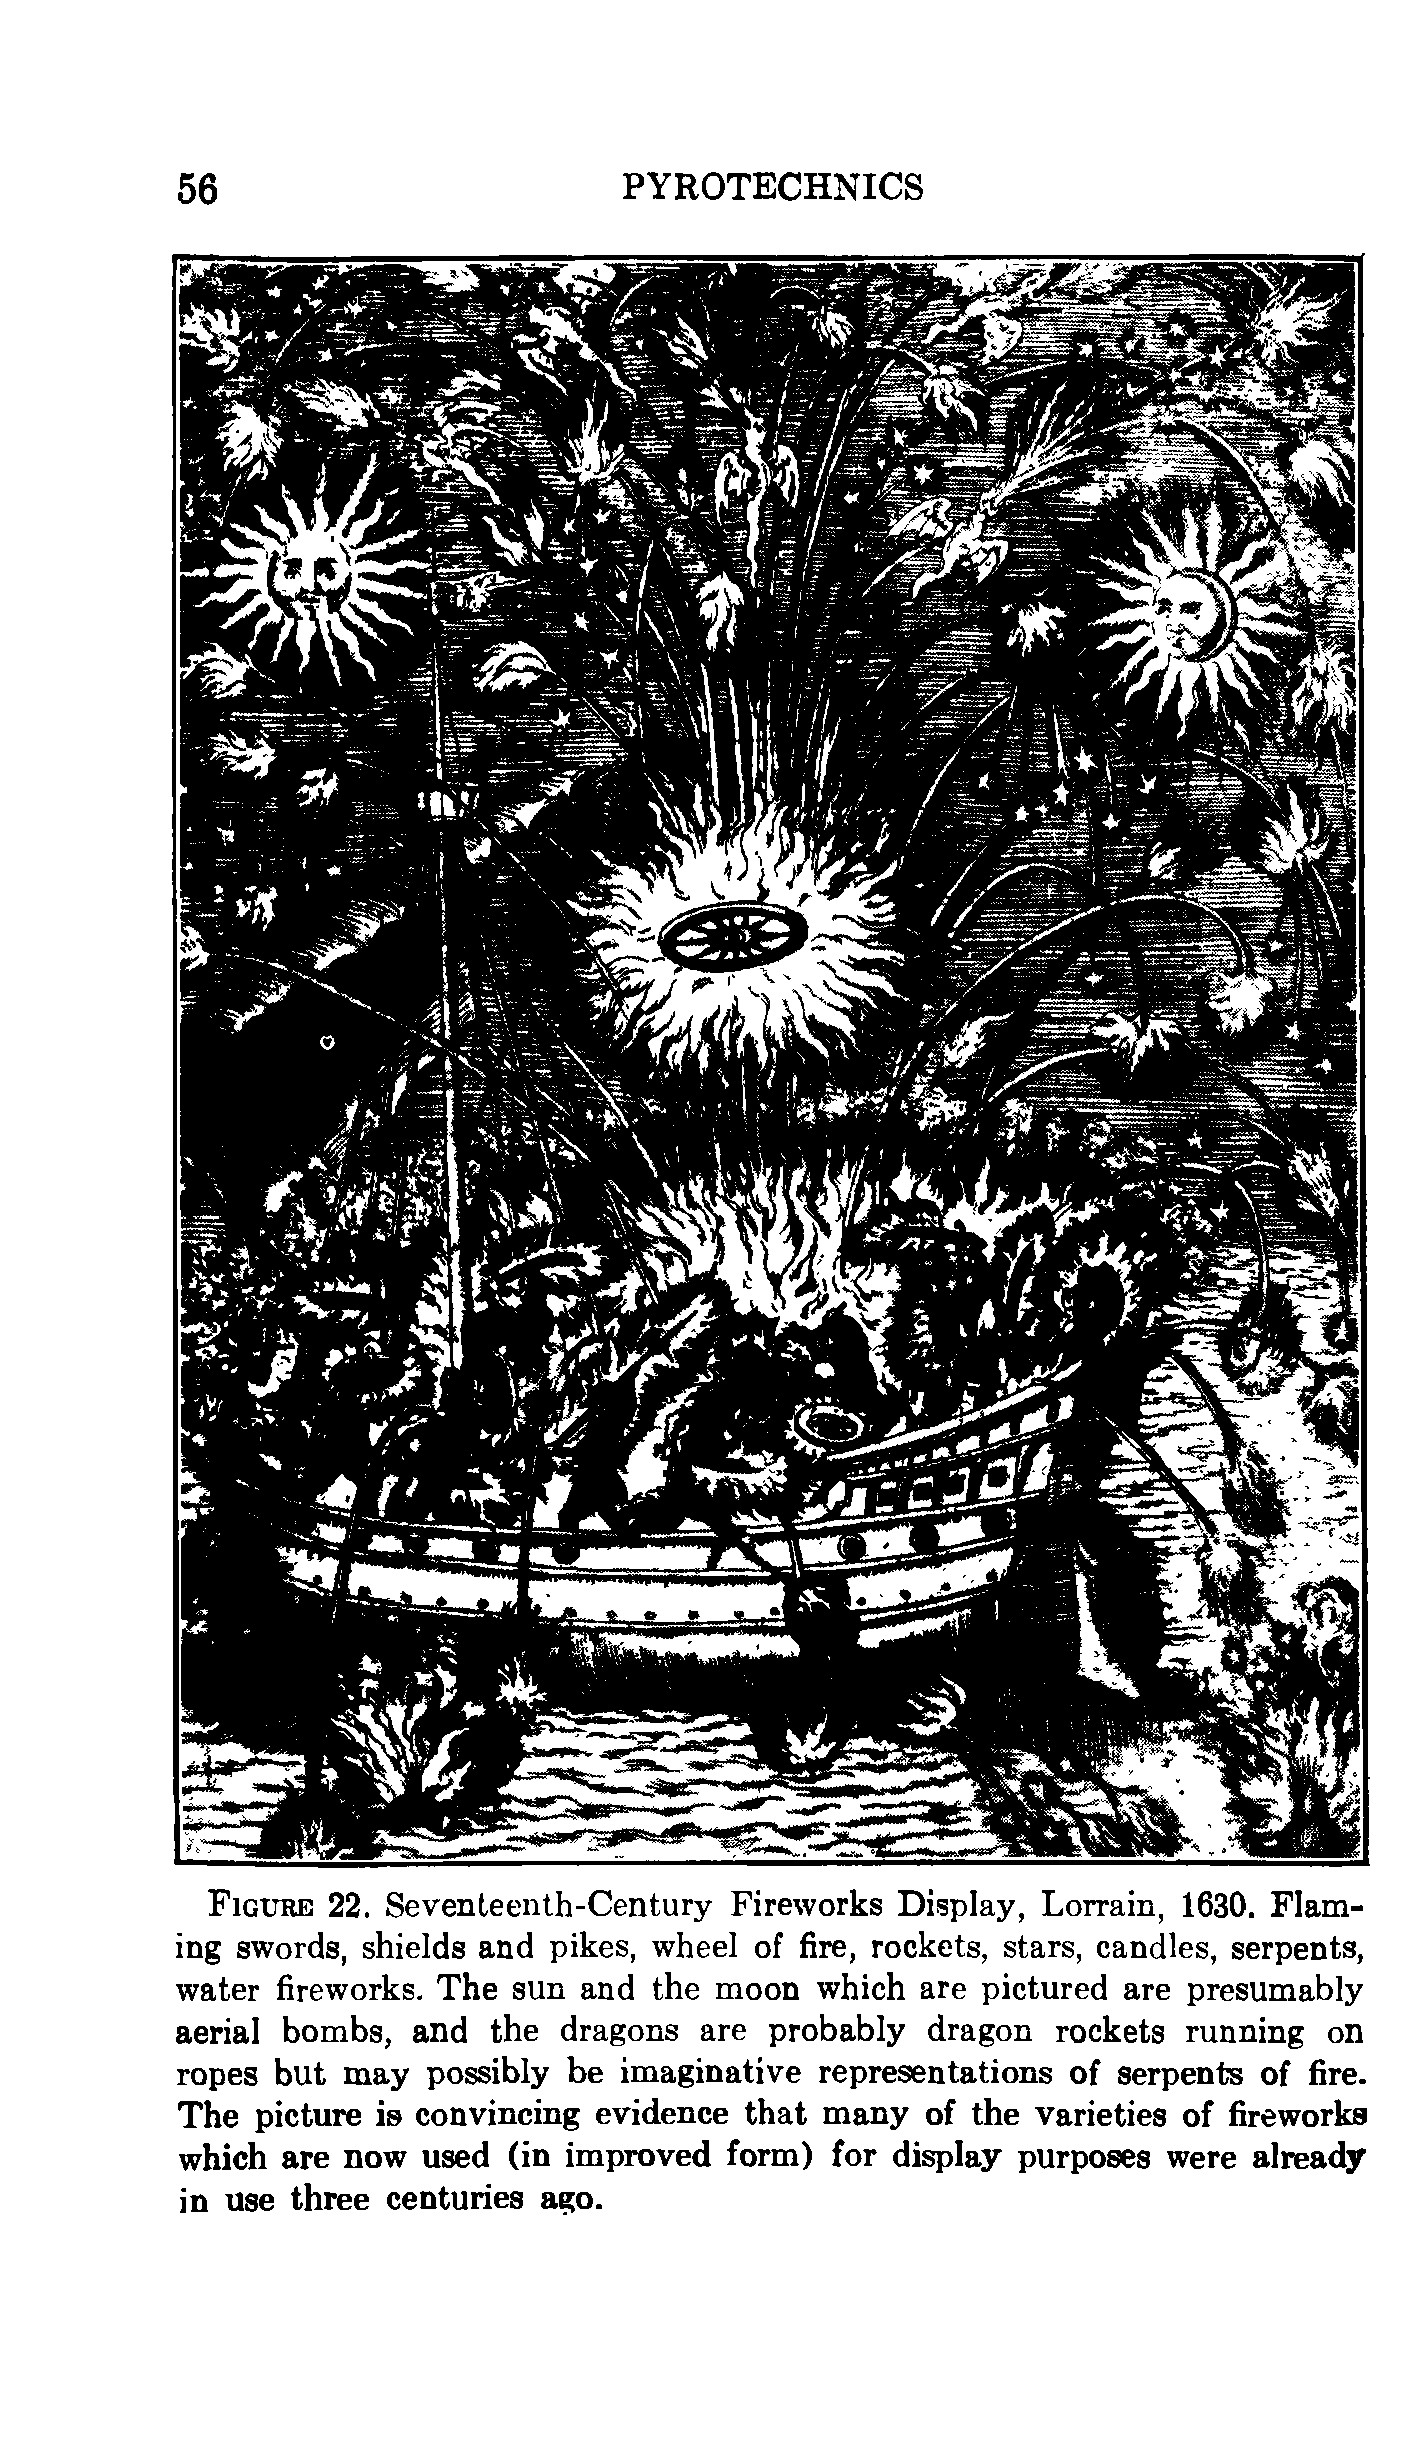 Figure 22. Seventeenth-Century Fireworks Display, Lorrain, 1630. Flaming swords, shields and pikes, wheel of fire, rockets, stars, candles, serpents, water fireworks. The sun and the moon which are pictured are presumably aerial bombs, and the dragons are probably dragon rockets running on ropes but may possibly be imaginative representations of serpents of fire. The picture is convincing evidence that many of the varieties of fireworks which are now used (in improved form) for display purposes were already in use three centuries ago.